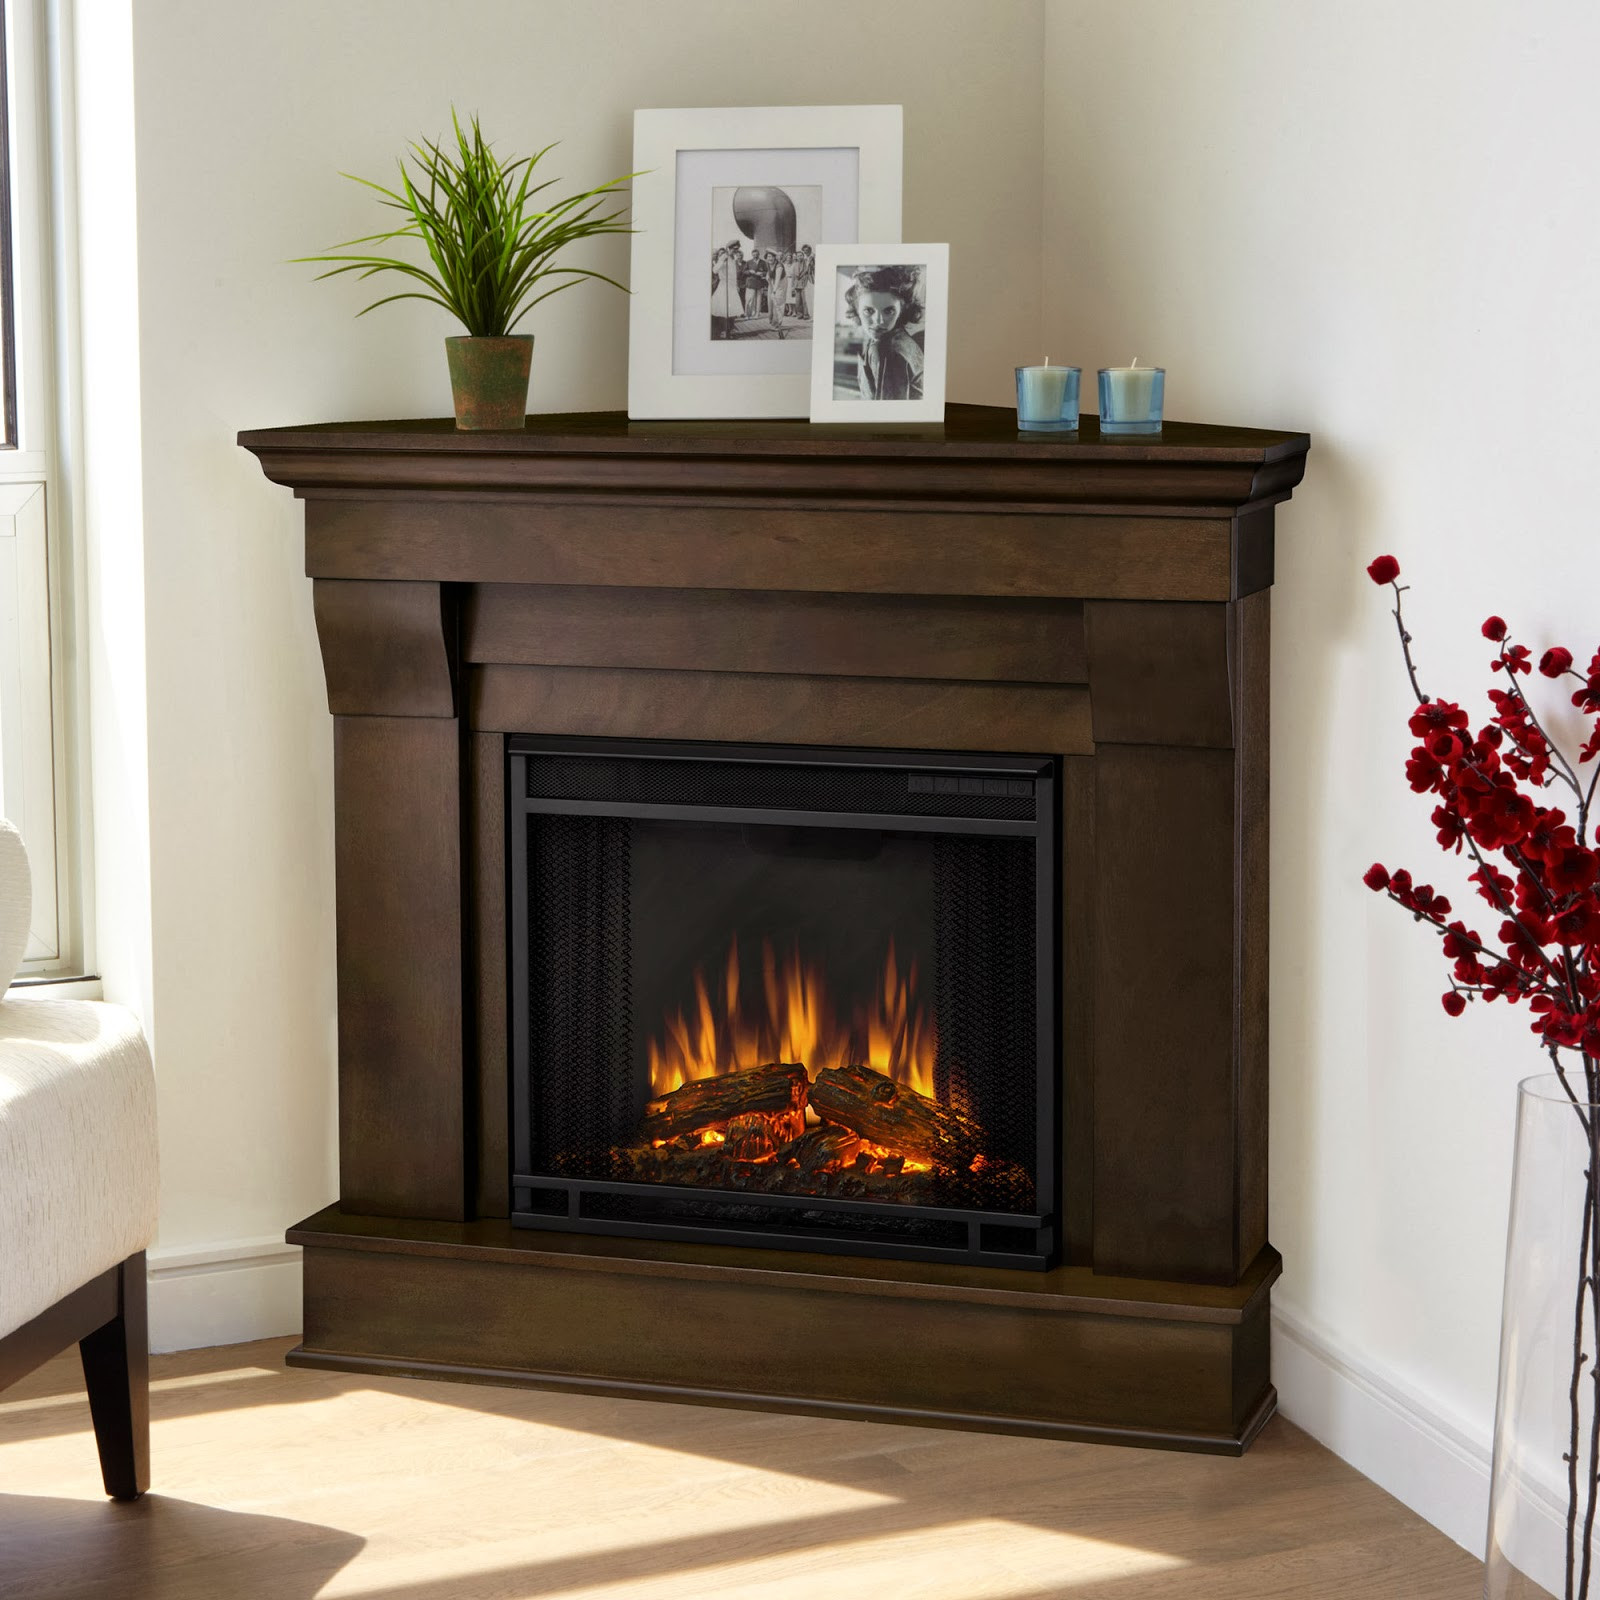 Corner Electric Fireplace
 Patio and Yards Gel Fuel & Electric Fireplaces